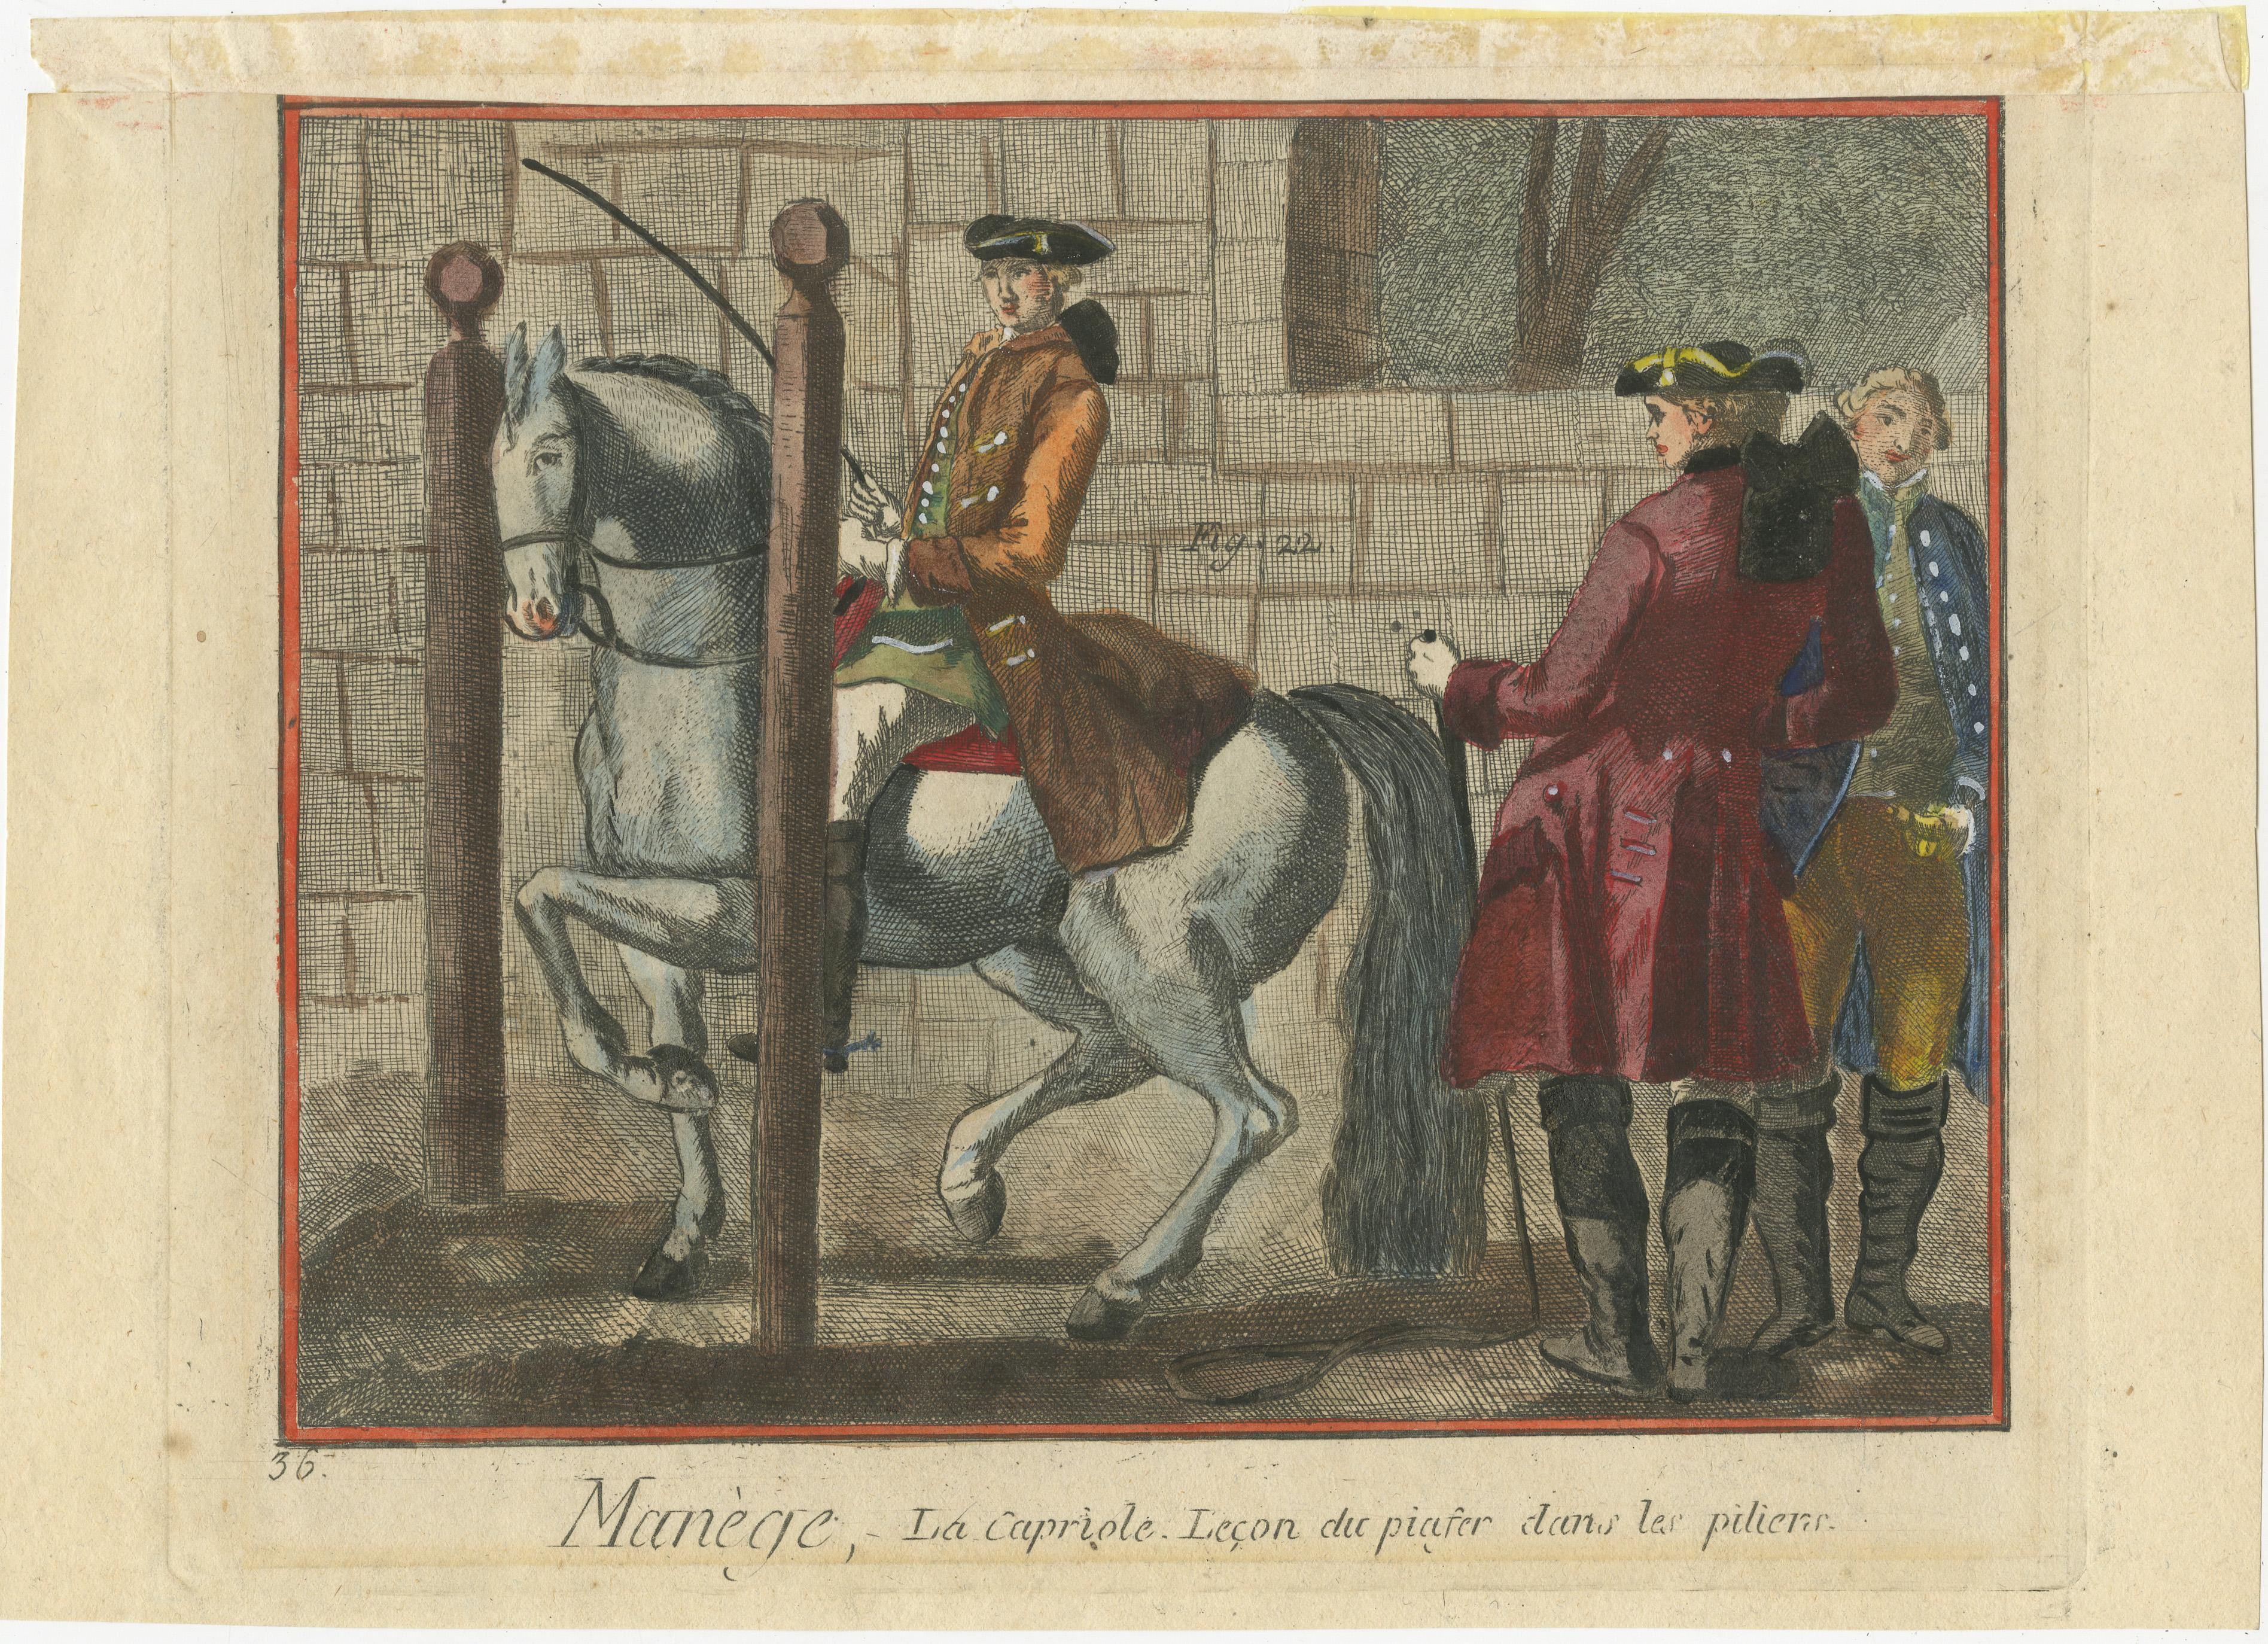 Antique print titled 'Manège, La Capriole. Lecon du piafer dans les piliers'. Copper engraving of horse riding: piaffe lesson between pillars. The piaffe is a dressage movement where the horse is in a highly collected and cadenced trot, in place or